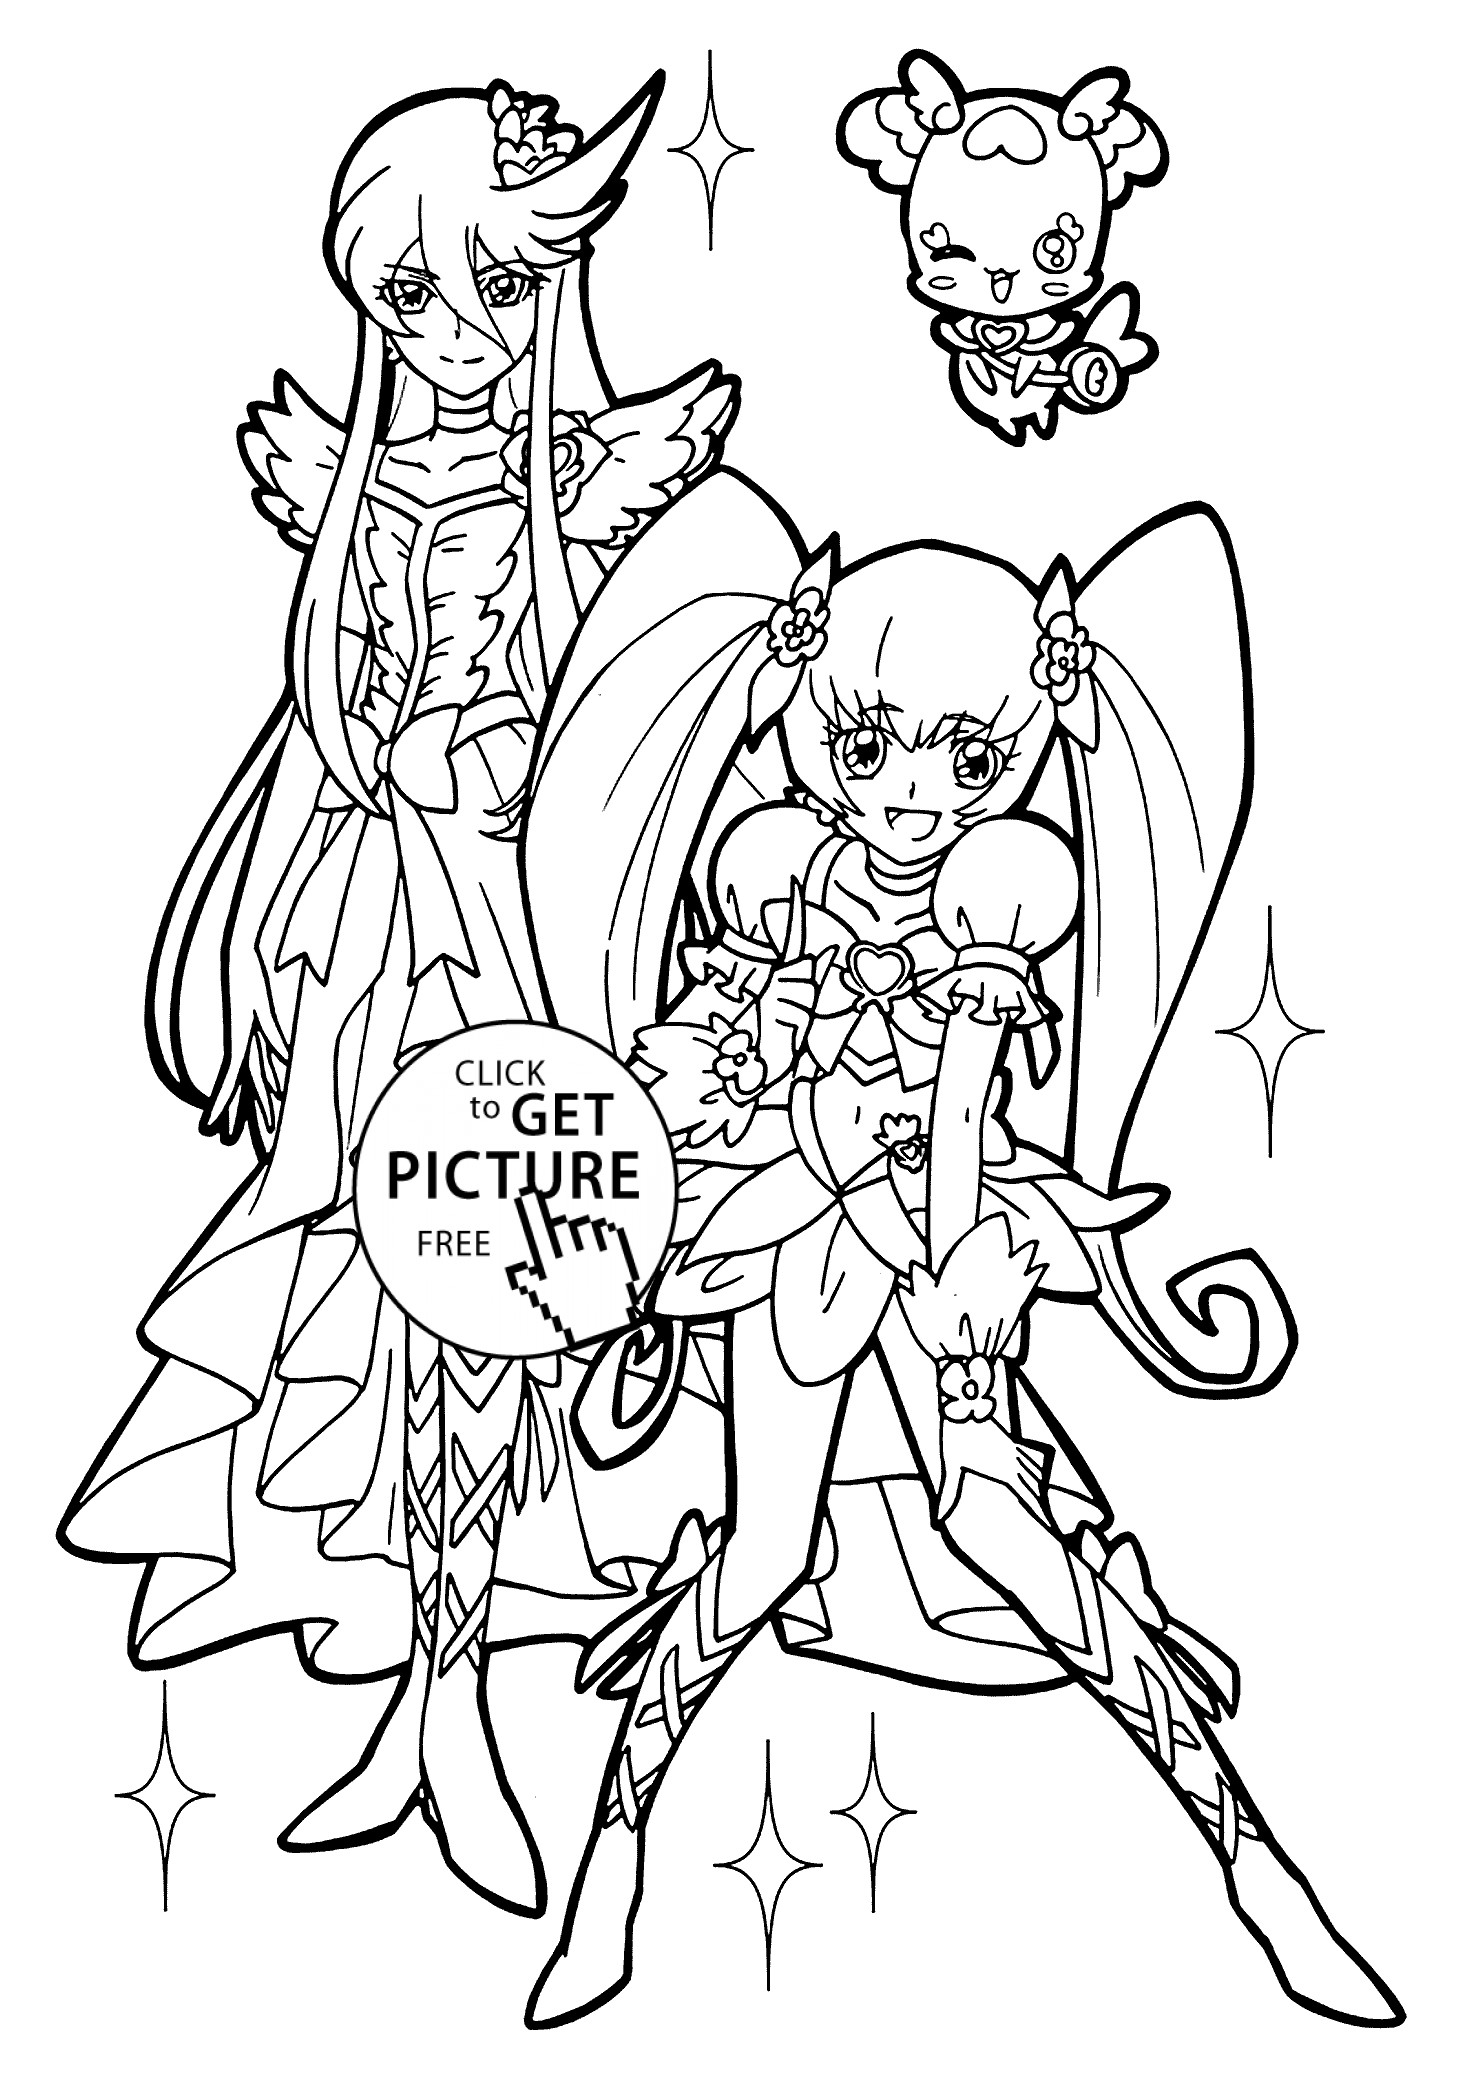 Fun Coloring Pages For Girls
 Nice girl from Pretty cure coloring pages for kids